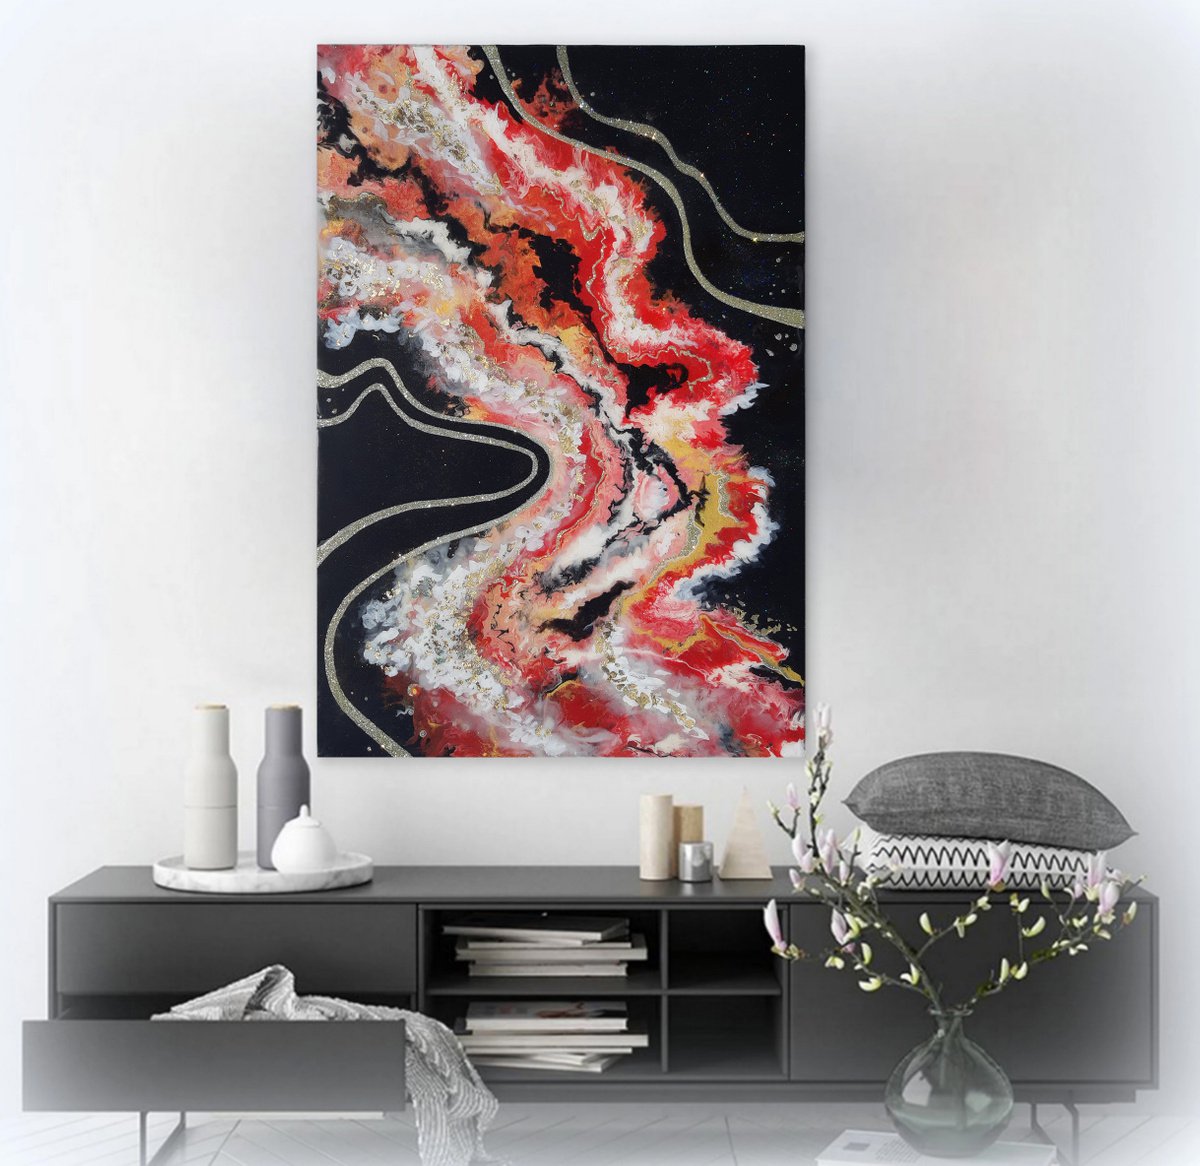 70x100cm. /River of time original acrylic resin painting, abstract art, explosion of emoti... by Alexandra Dobreikin